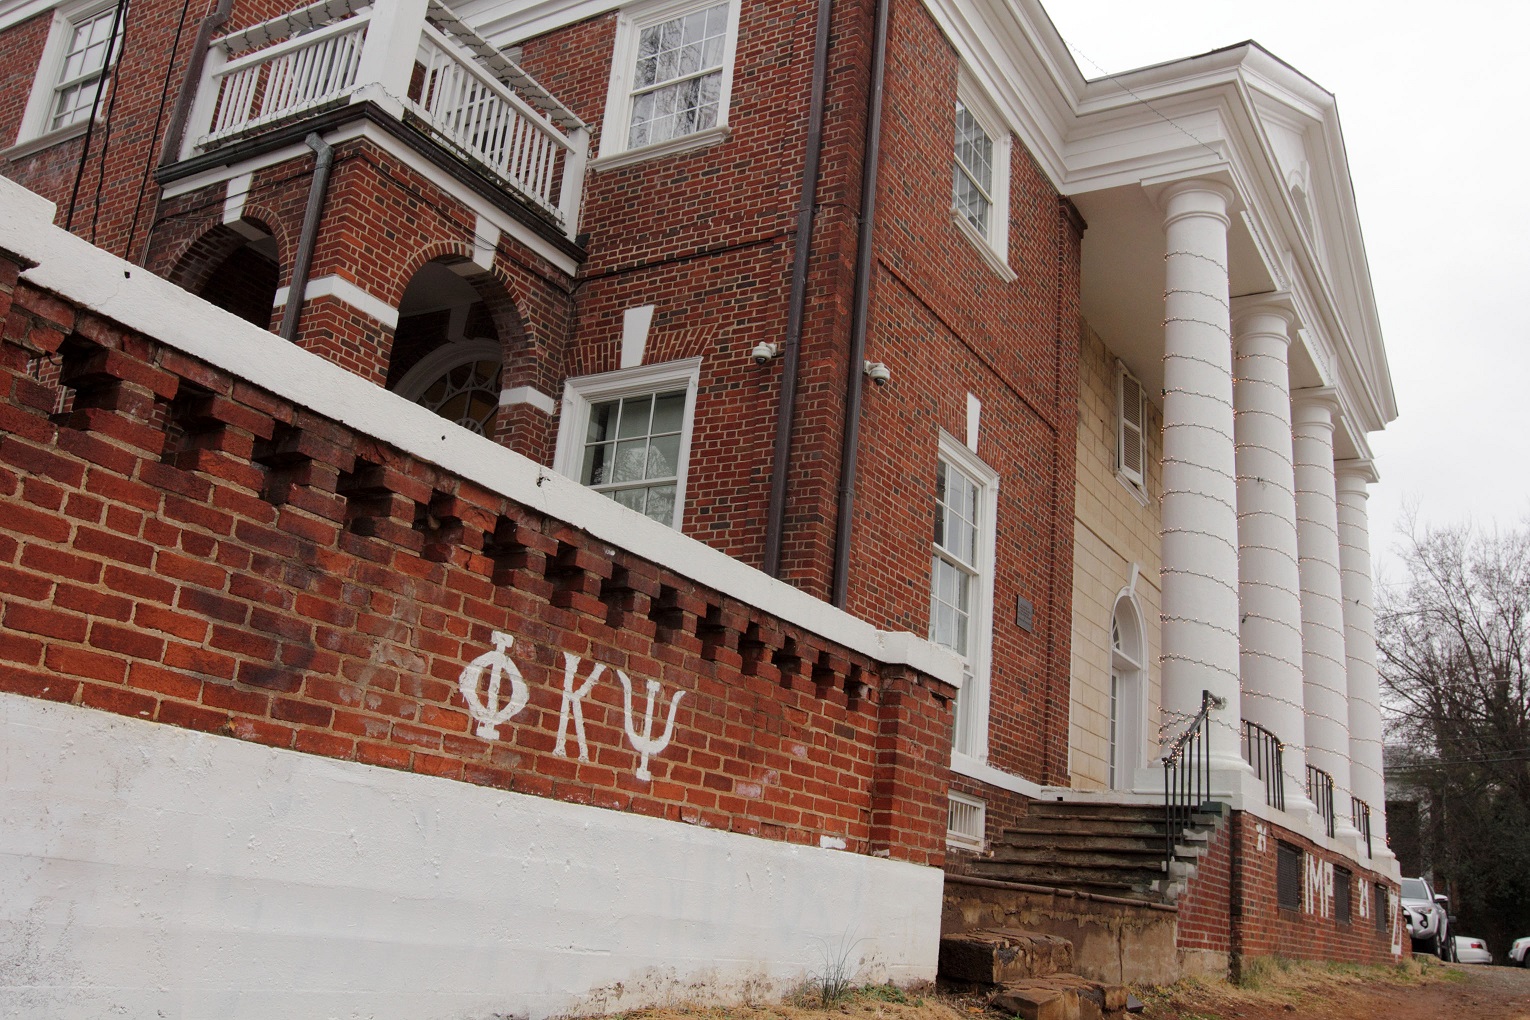 The Phi Kappa Psi fraternity house is seen on the University of Virginia campus on December 6, 2014 in Charlottesville, Virginia. On Friday, Rolling Stone magazine issued an apology for discrepencies that were published in an article regarding the alleged gang rape of a University of Virginia student by members of the Phi Kappa Psi fraternity. (Jay Paul/Getty Images)